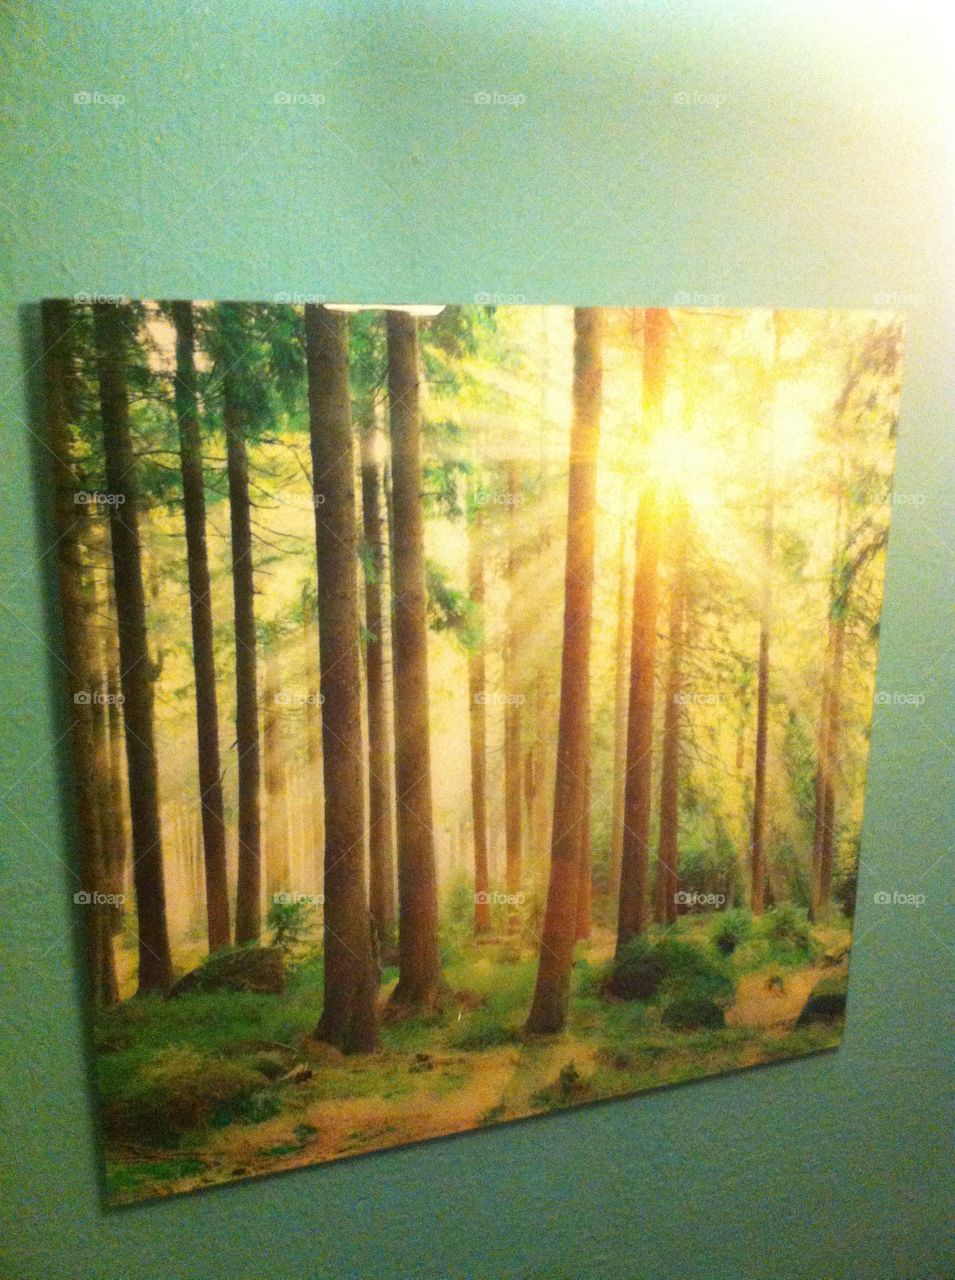 Sunlight Forest. it is a beautiful picture I have on my wall depicting a gorgeous looking forest